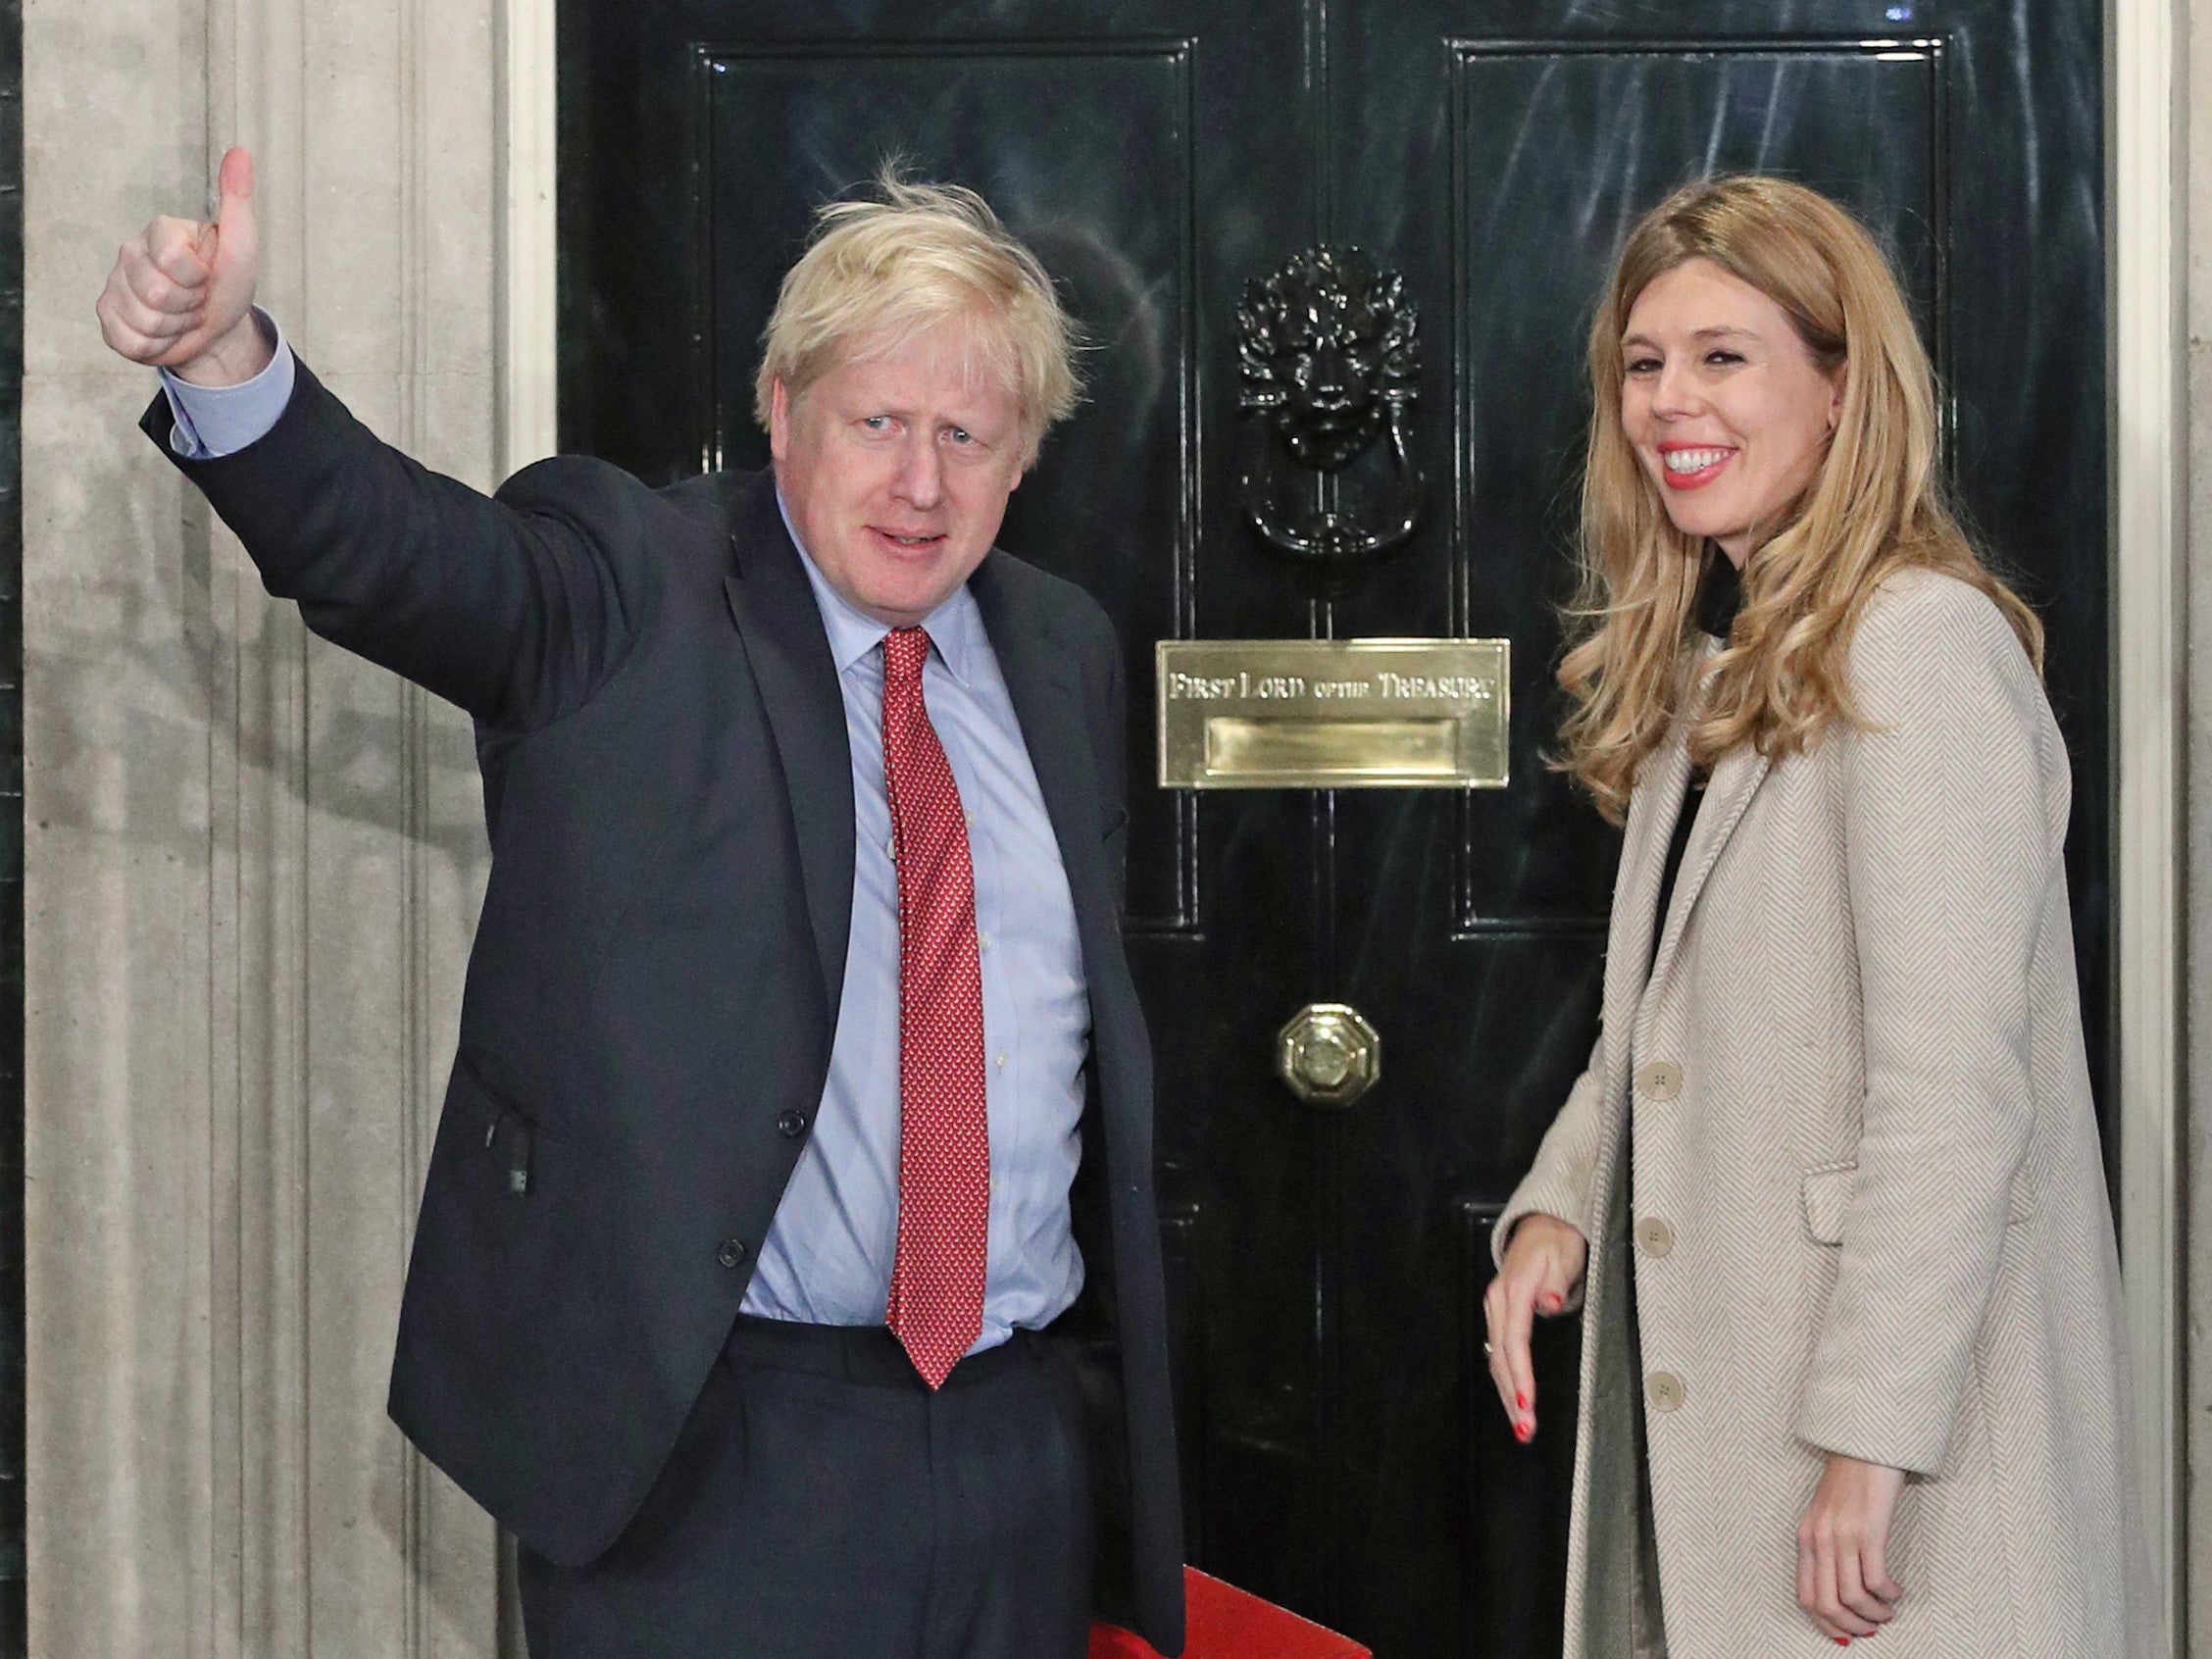 World leaders have hailed Boris Johnson's return to Downing Street with a thumping majority